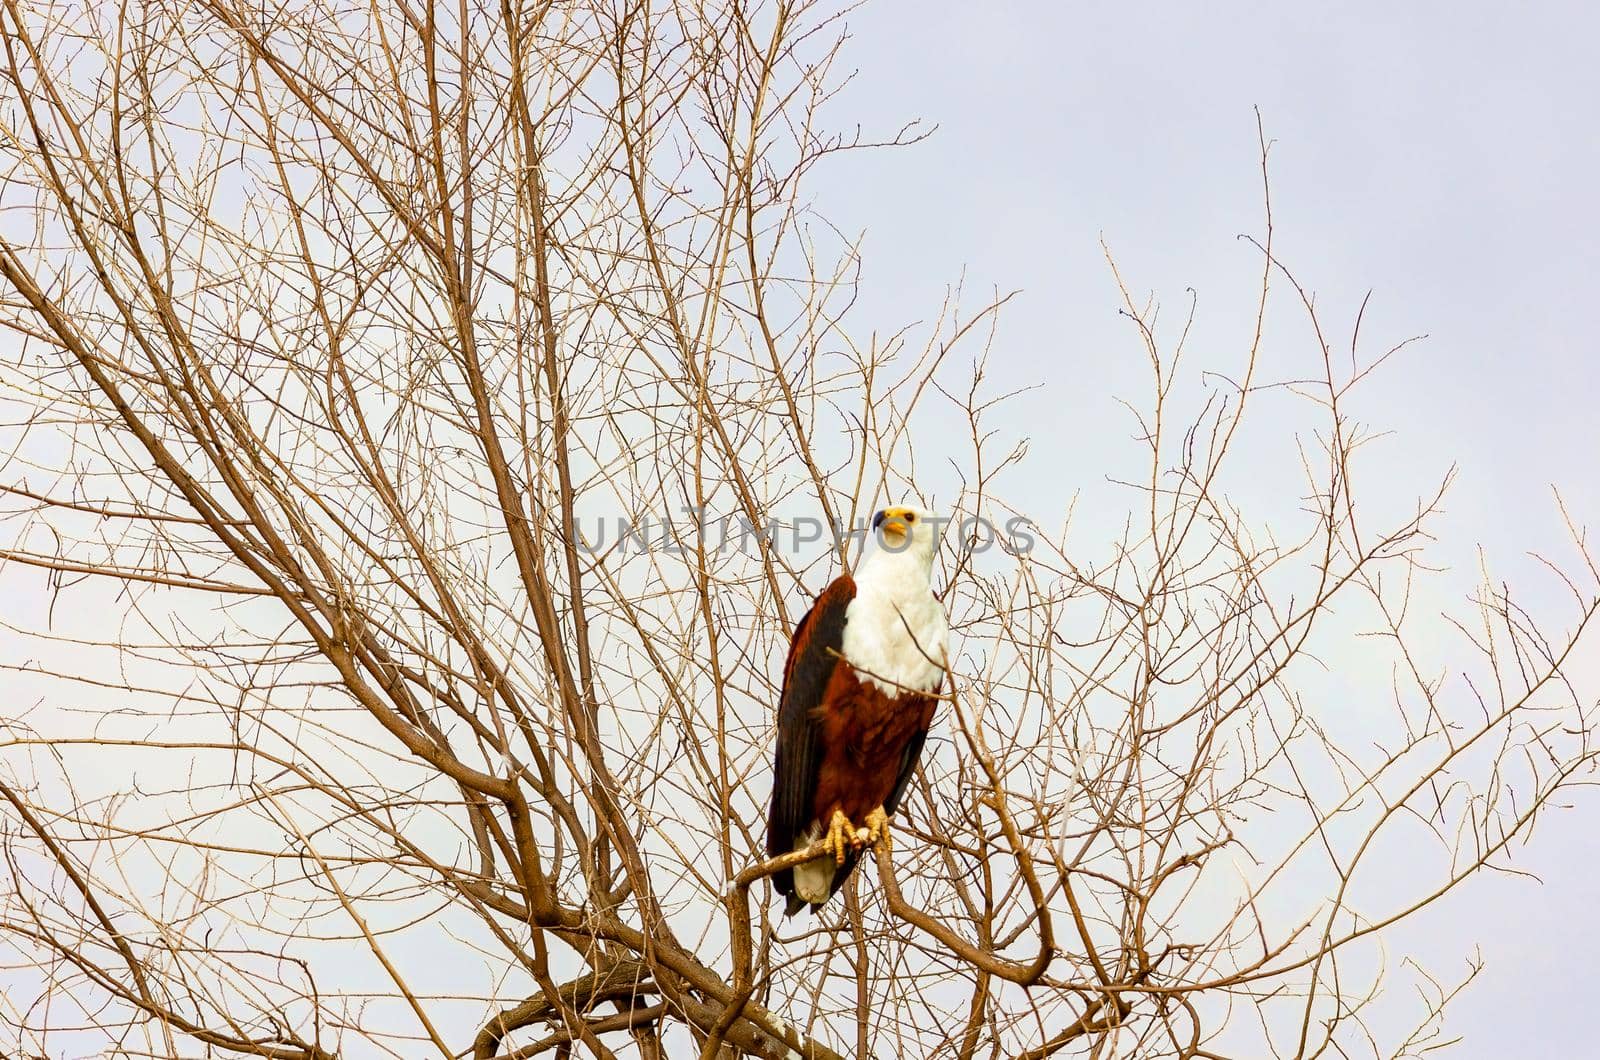 Kenya National Park, wildlife. The eagle is sitting on the branches of trees.